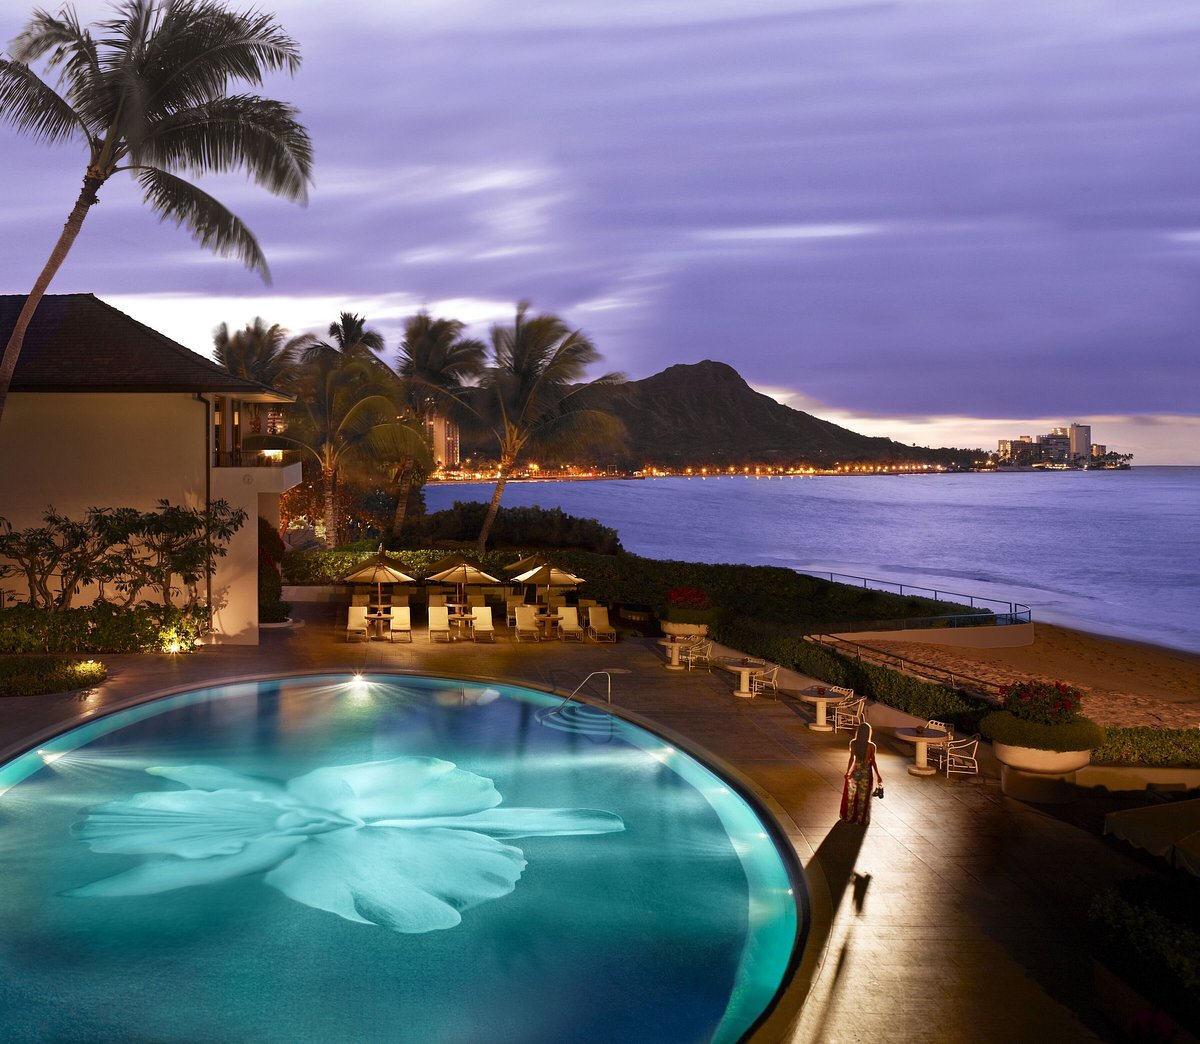 Which Waikiki hotels have the best pools?